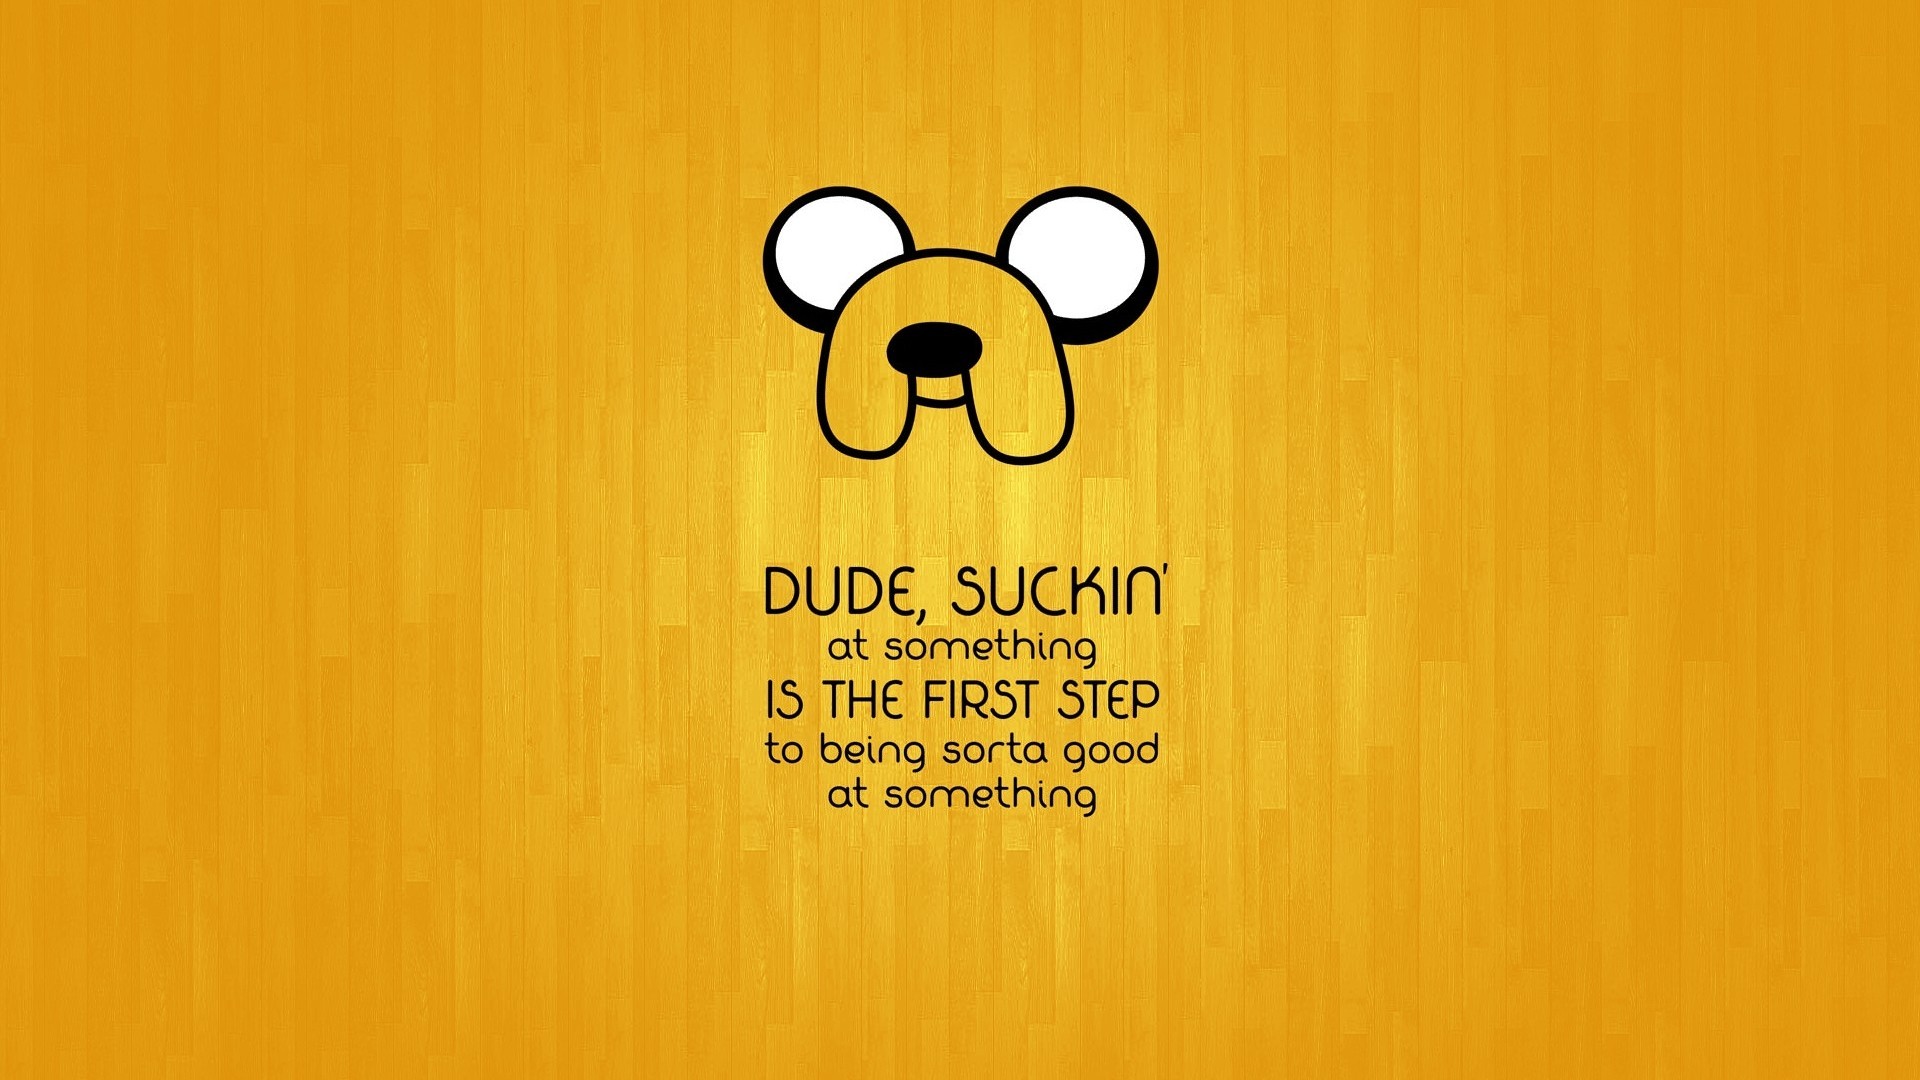 General 1920x1080 Jake the Dog cartoon Adventure Time motivational quote TV series digital art simple background text